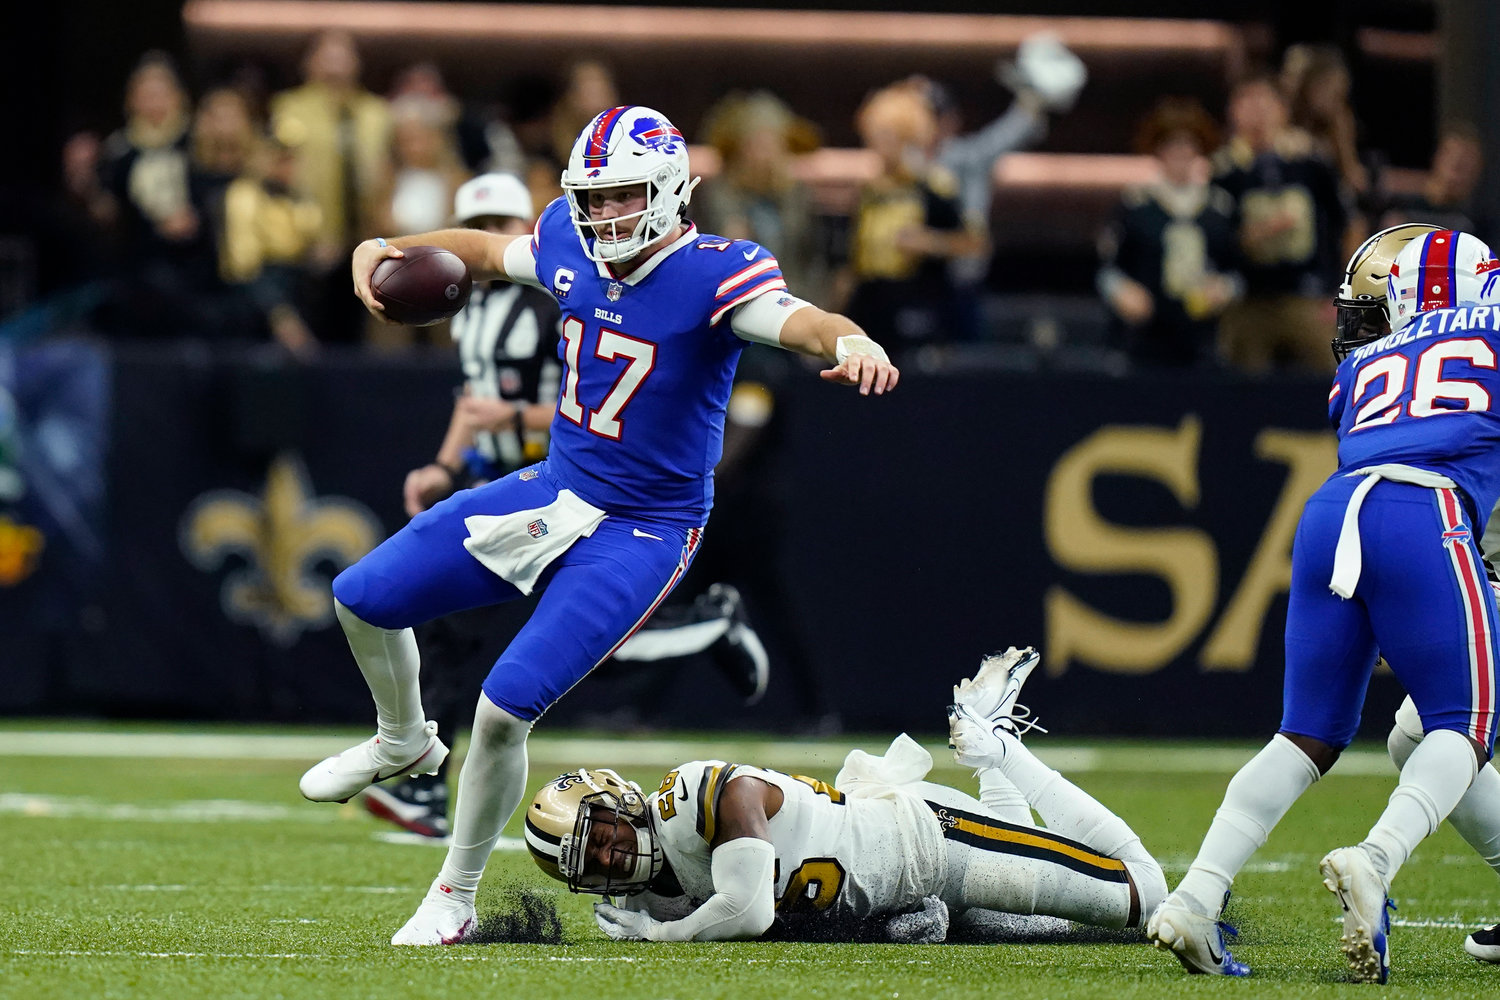 BREAKING THE TACKLE — Buffalo Bills quarterback Josh Allen (17) carries against New Orleans Saints cornerback P.J. Williams in the second half of an NFL game in New Orleans, Thursday, Nov. 25. The Bills won, 31-6.